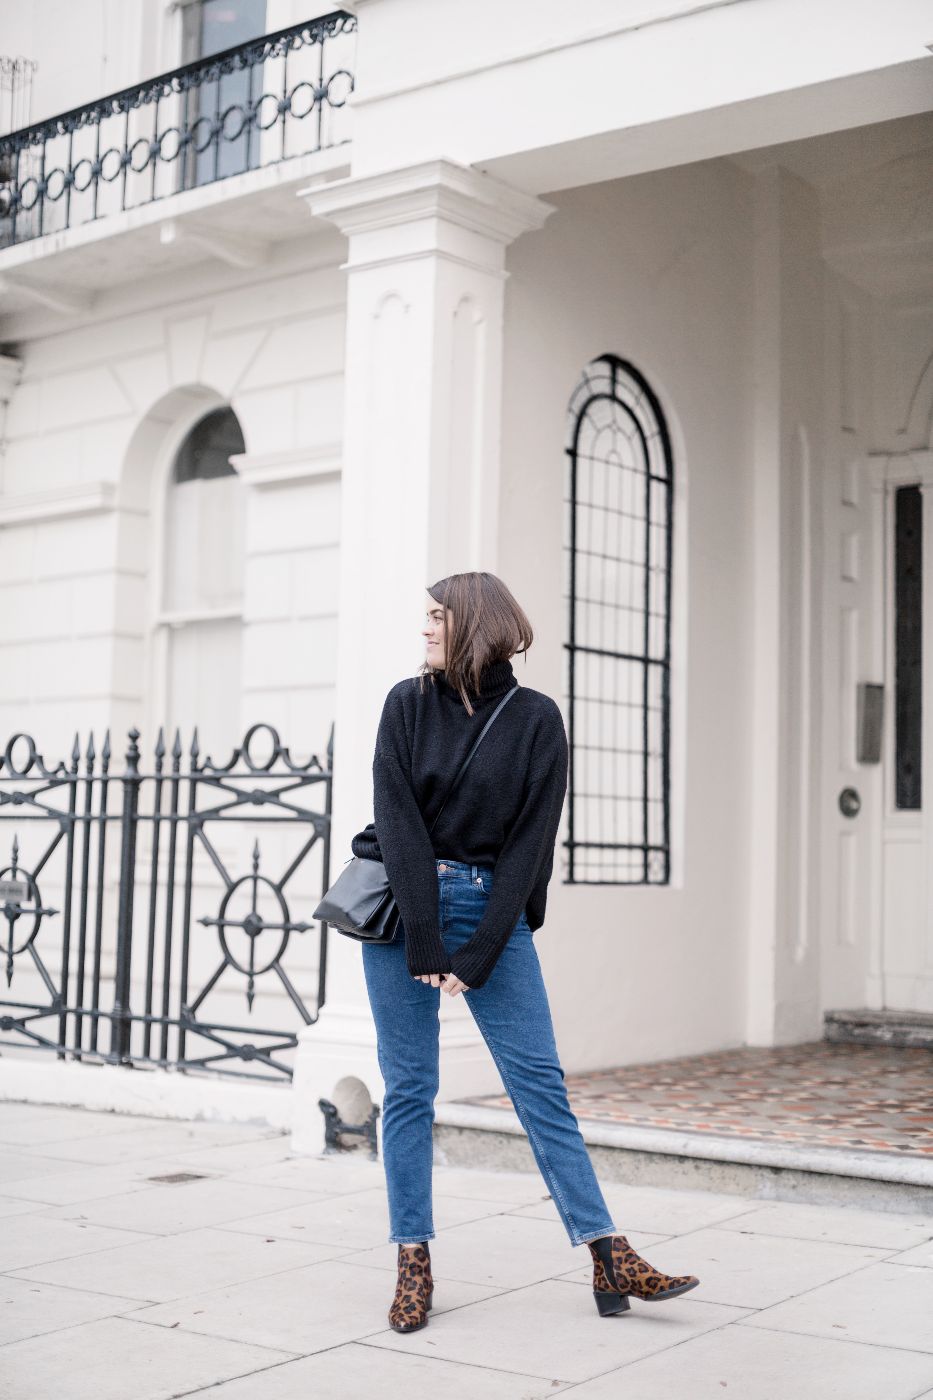 The Basics You Need For Your Winter Capsule Wardrobe – The Anna Edit